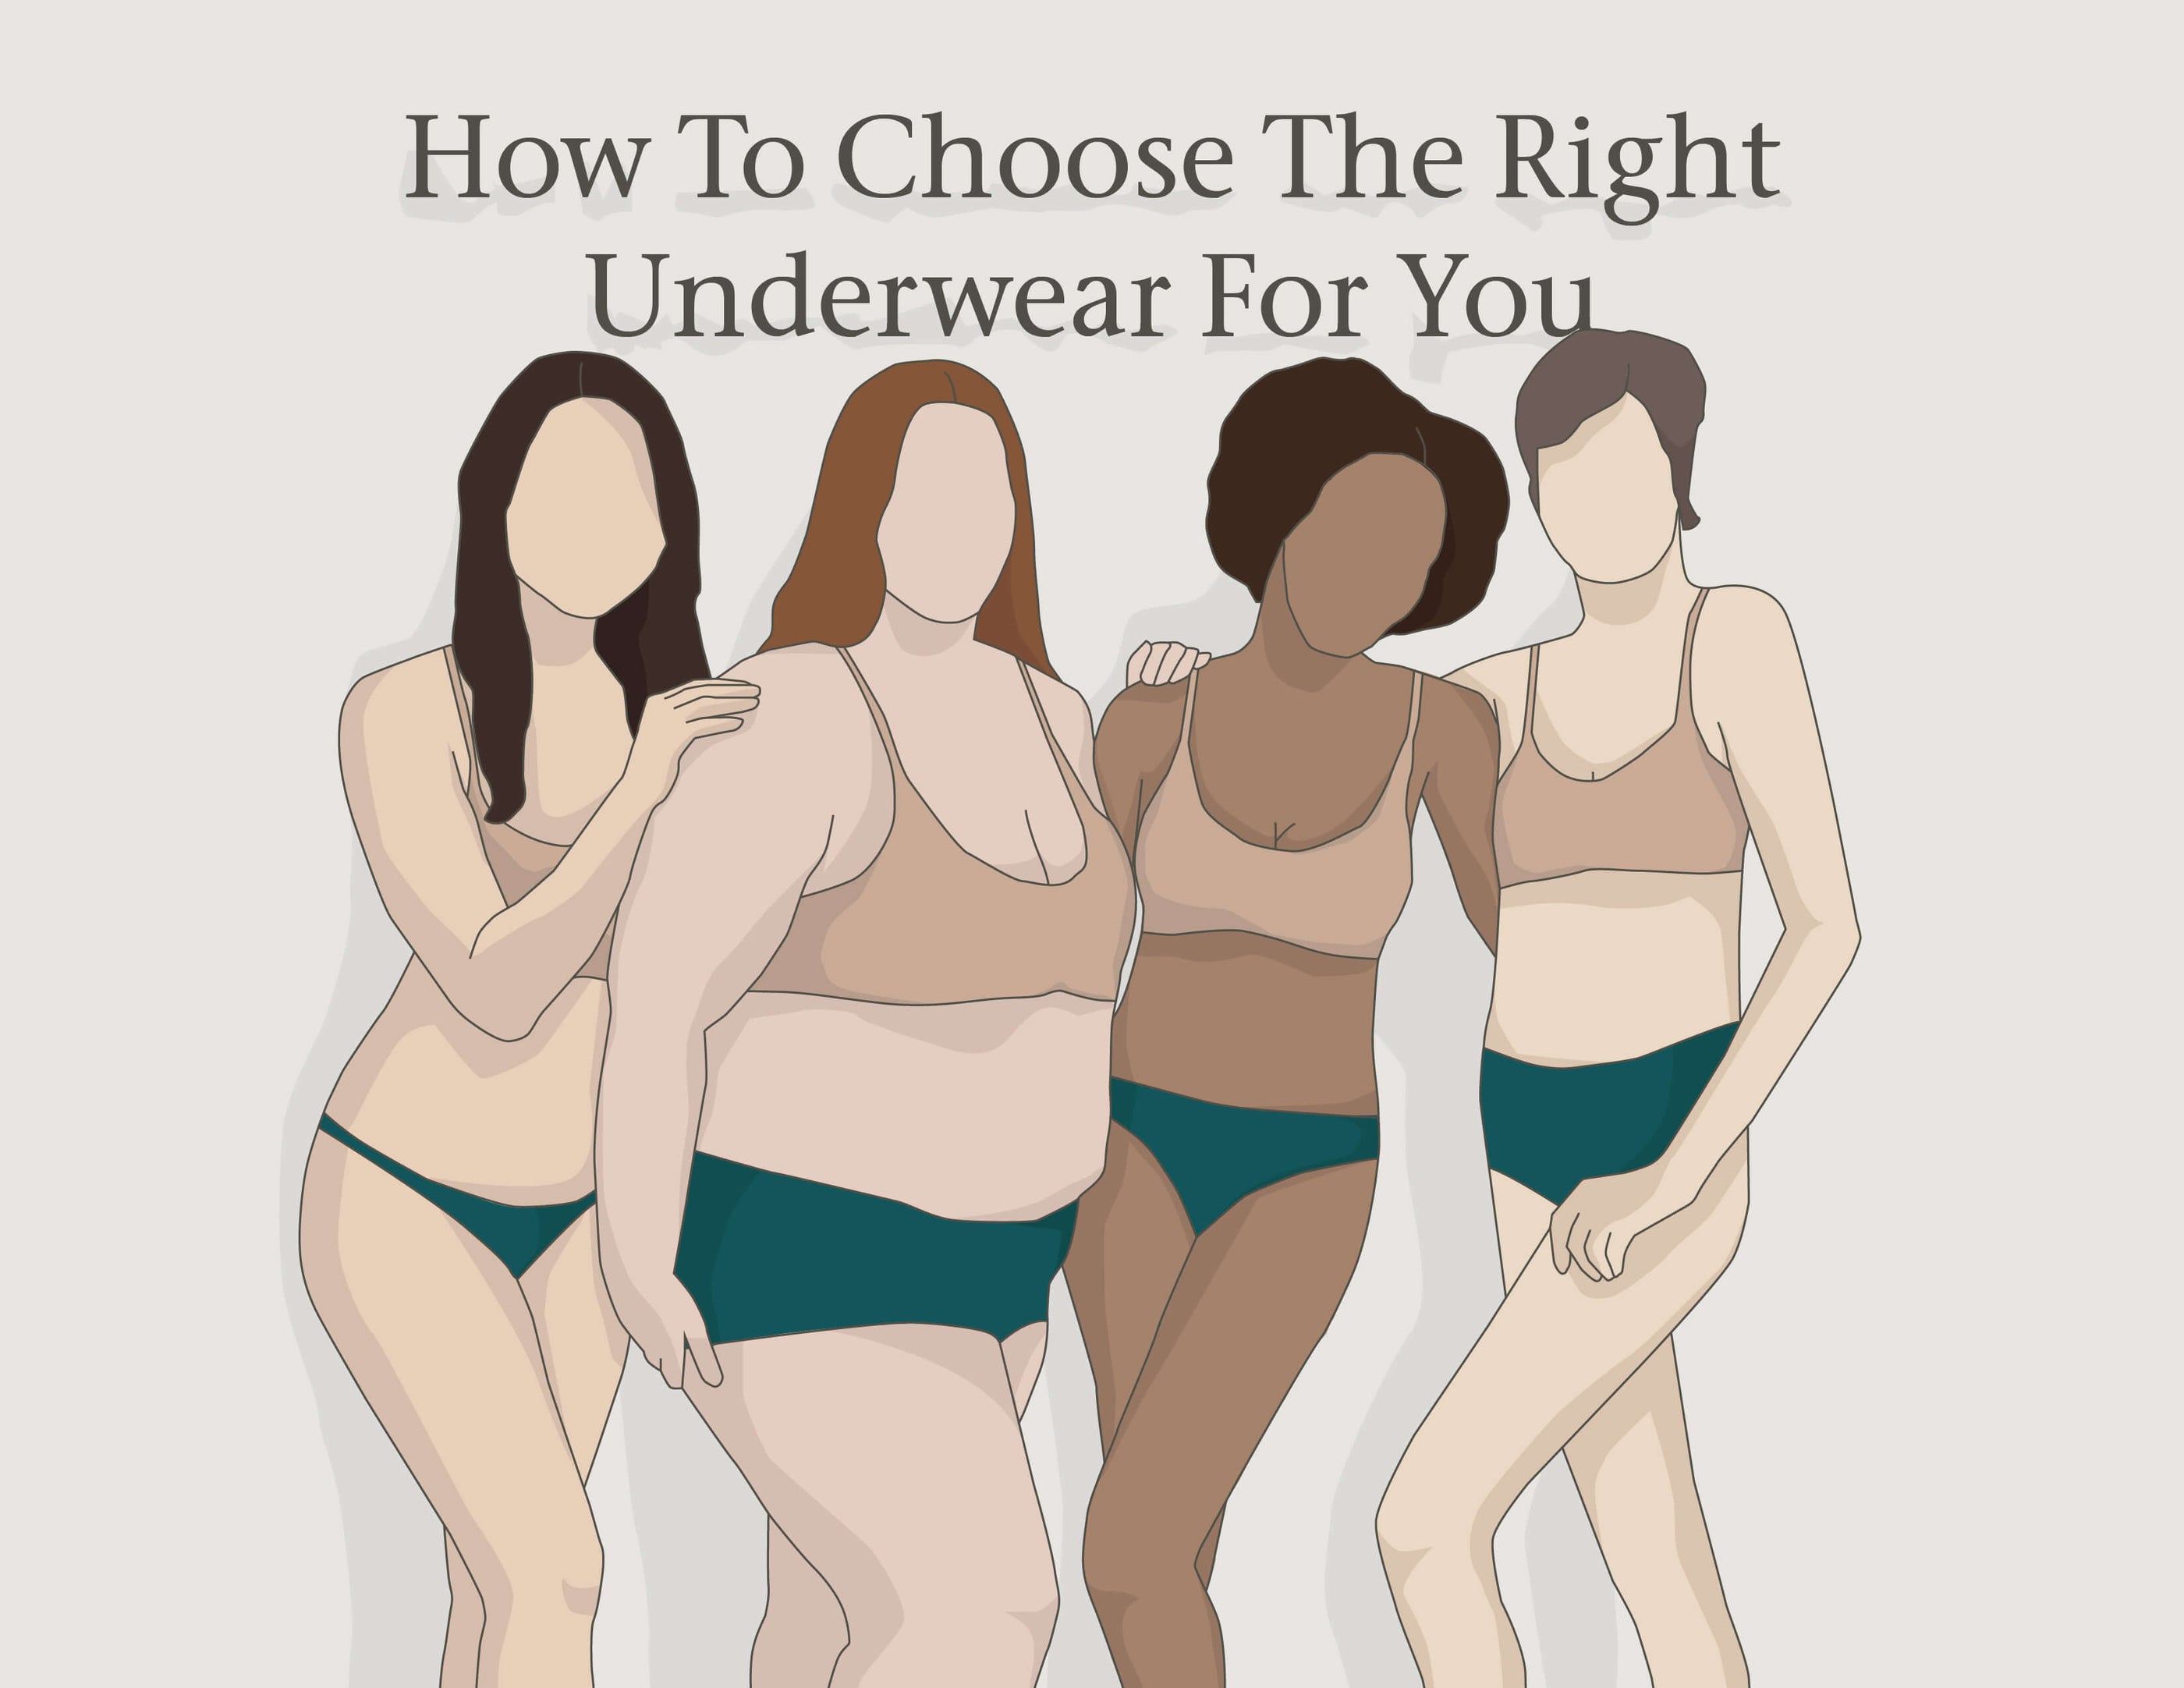 Choosing the right lingerie to wear under your clothes